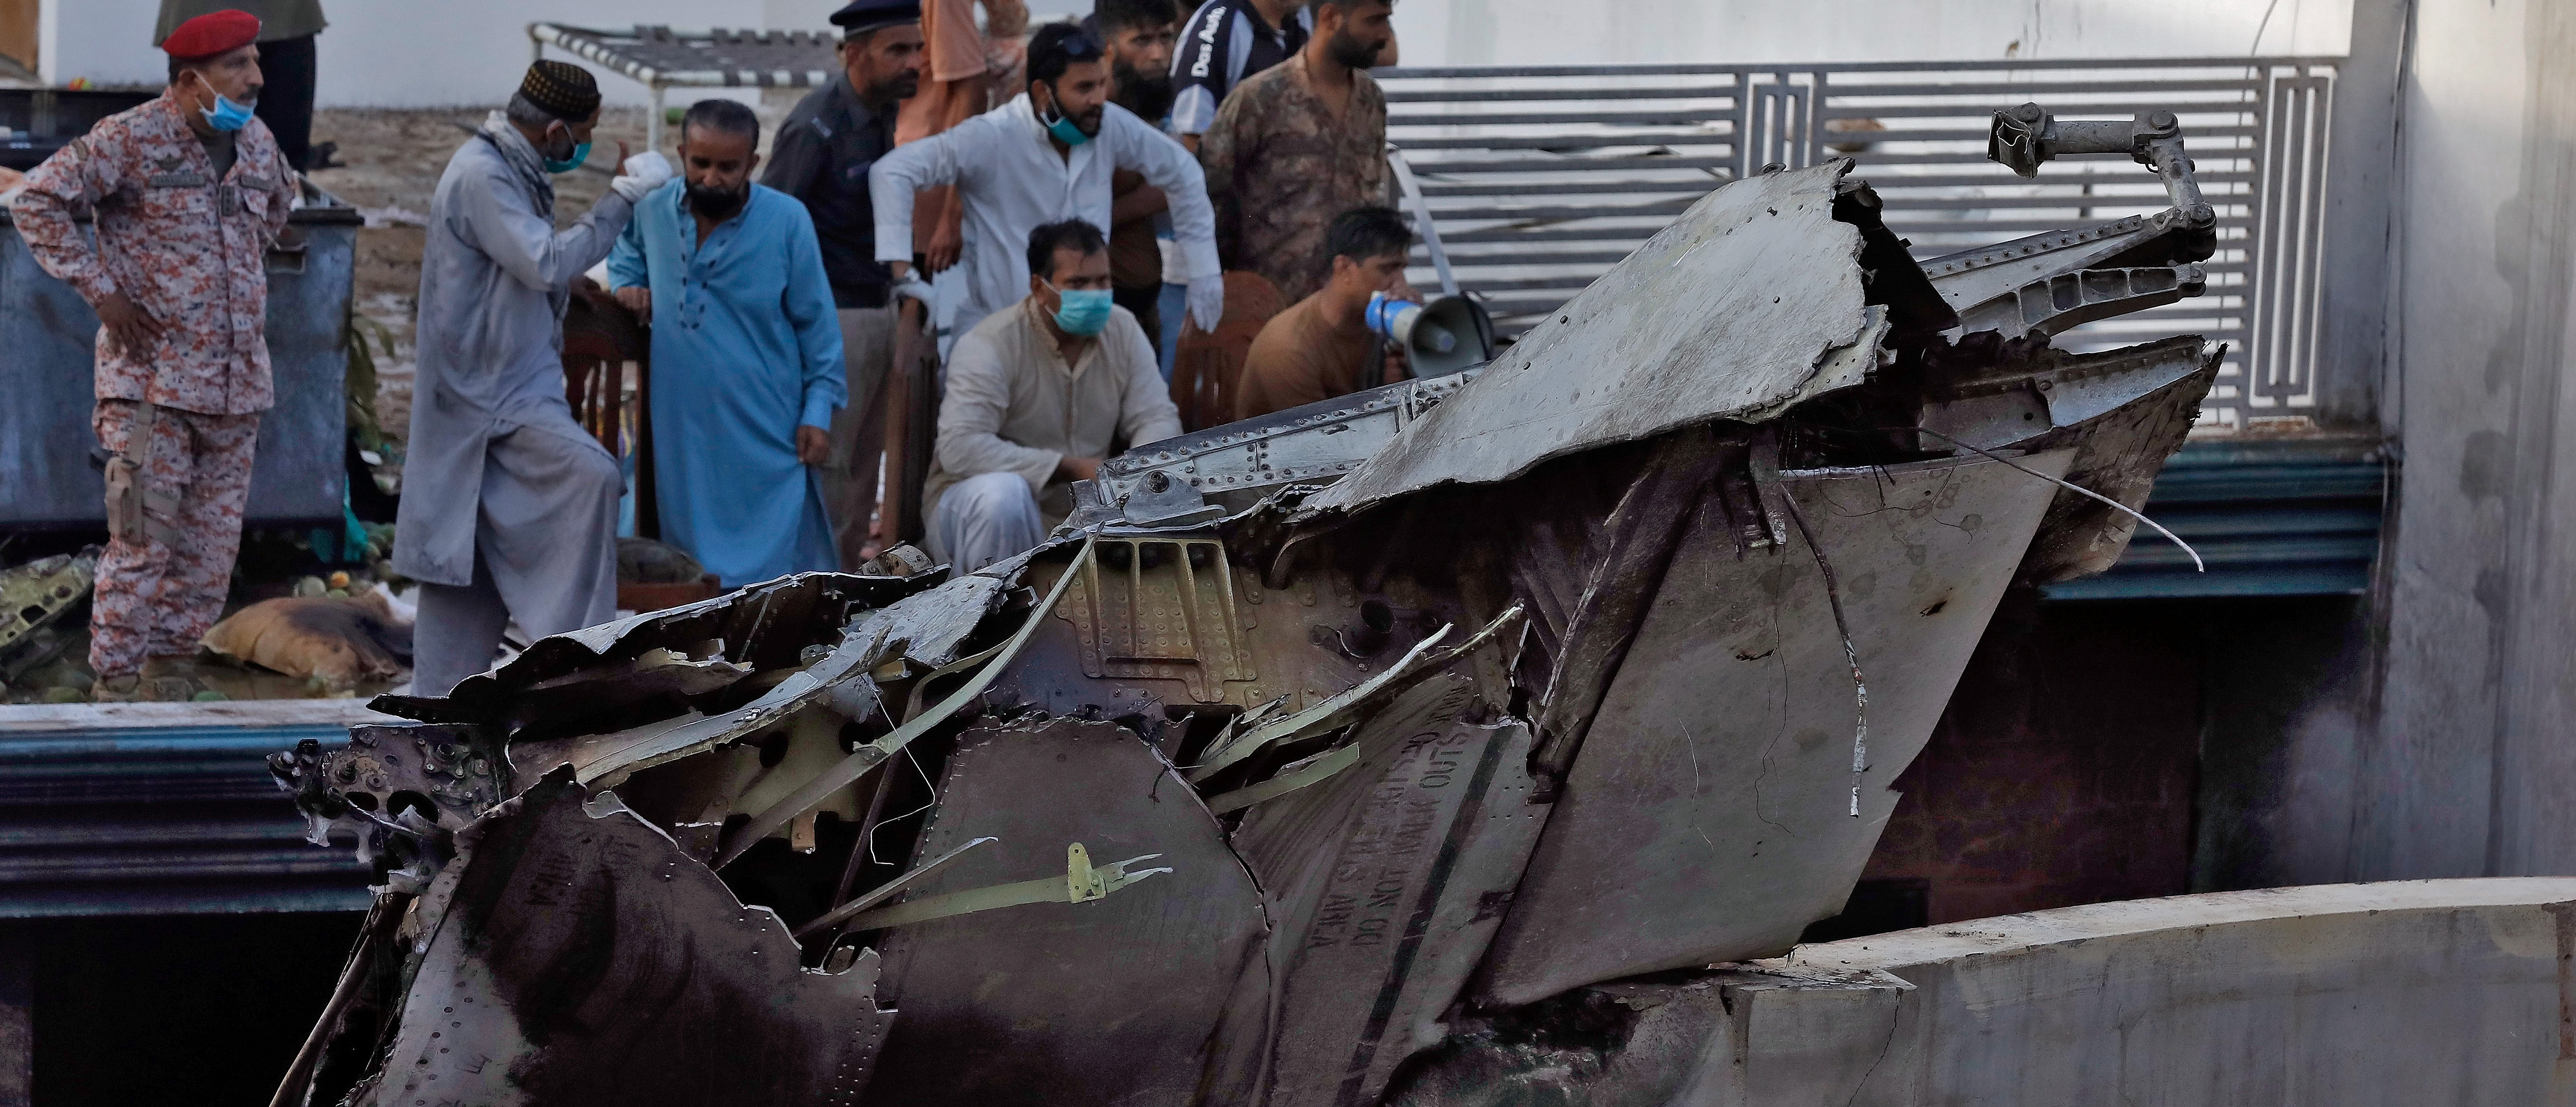 People stand next to the debris of a plane after crashed in a residential area near an airport in Karachi, Pakistan May 22, 2020. REUTERS/Akhtar Soomro - RC2PTG9N20SG